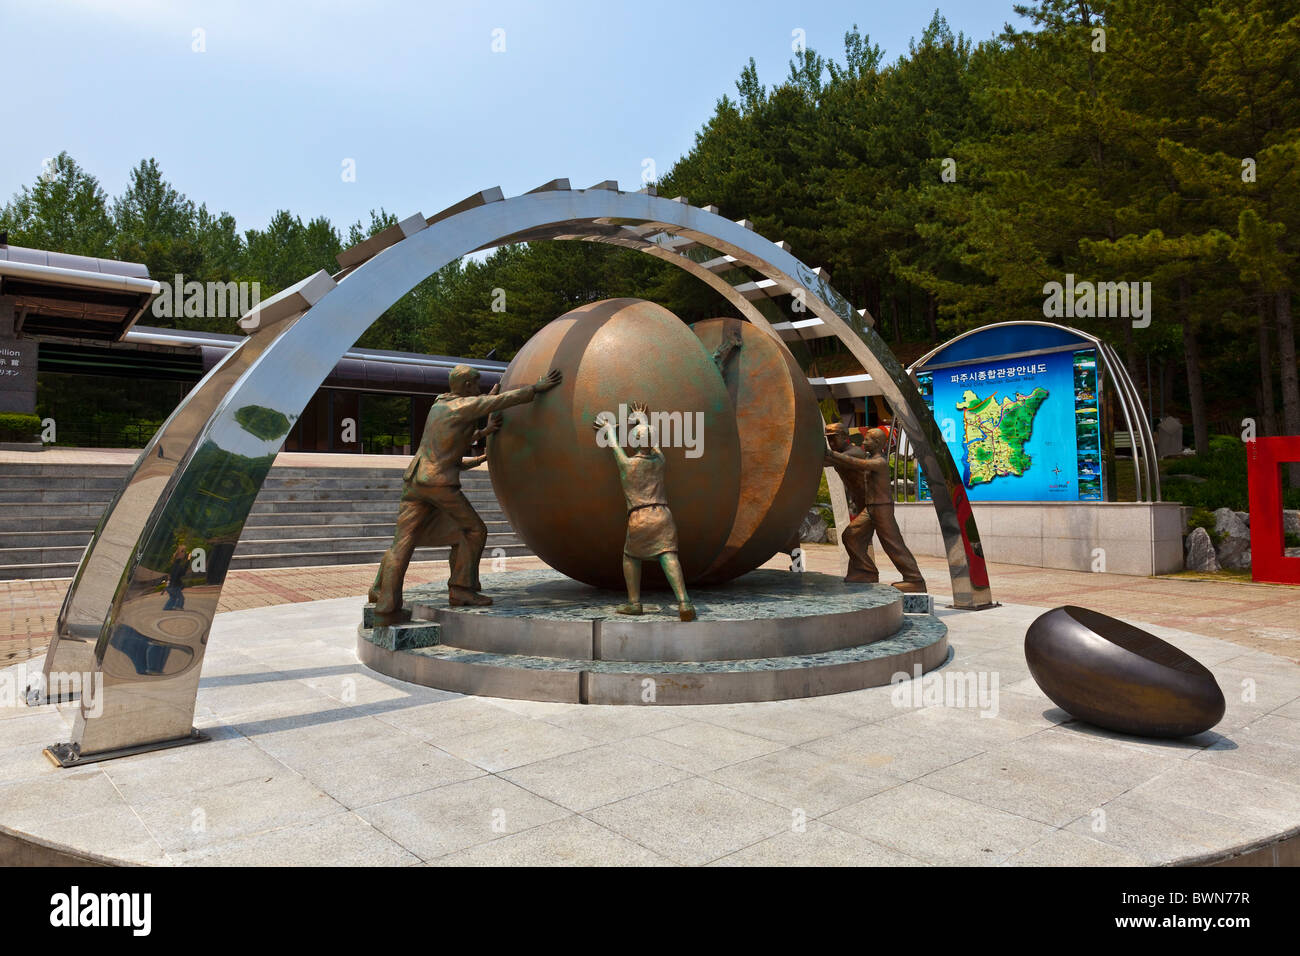 Re-Unification Sculpture at the entrance to the Third Tunnel at the DMZ Demilitarized Zone Panmunjeon South Korea. JMH3803 Stock Photo